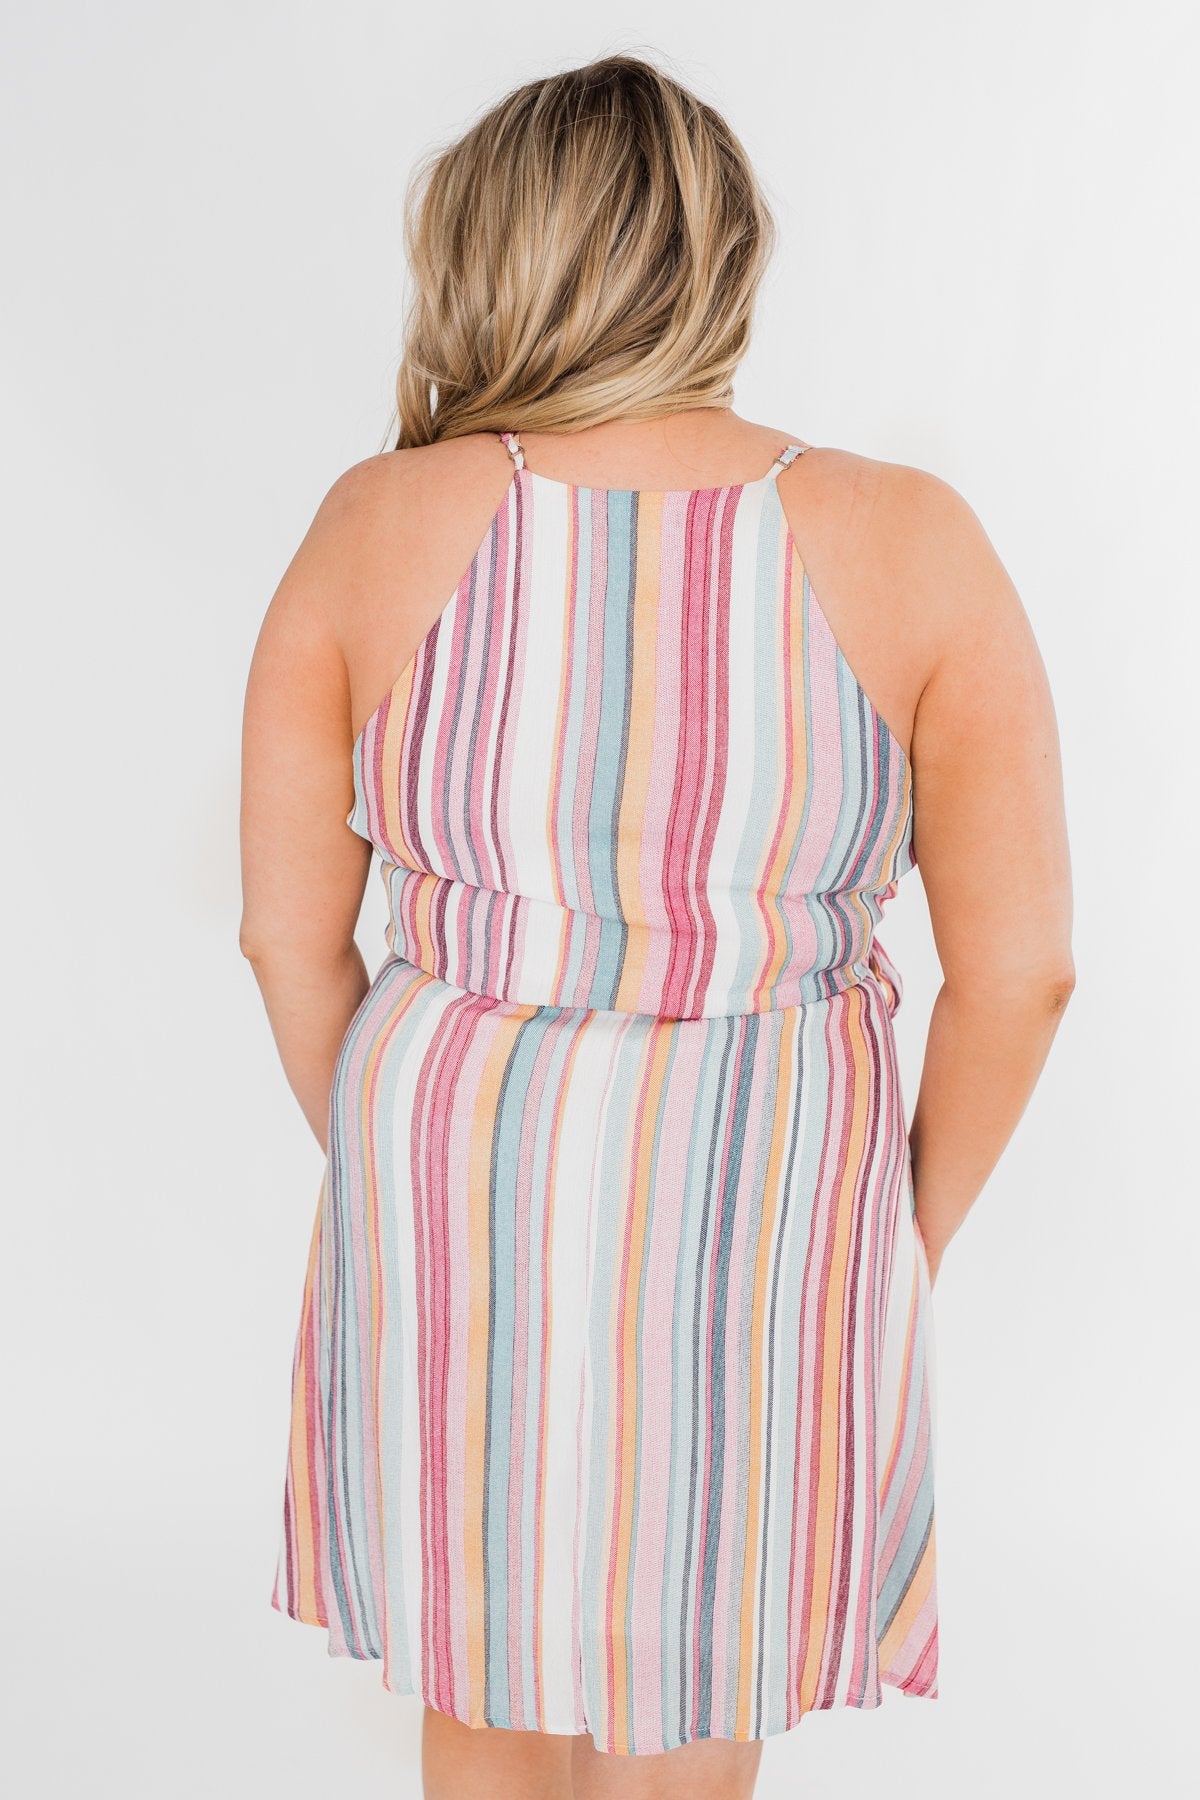 We Have Forever Dress- Multi-Colored